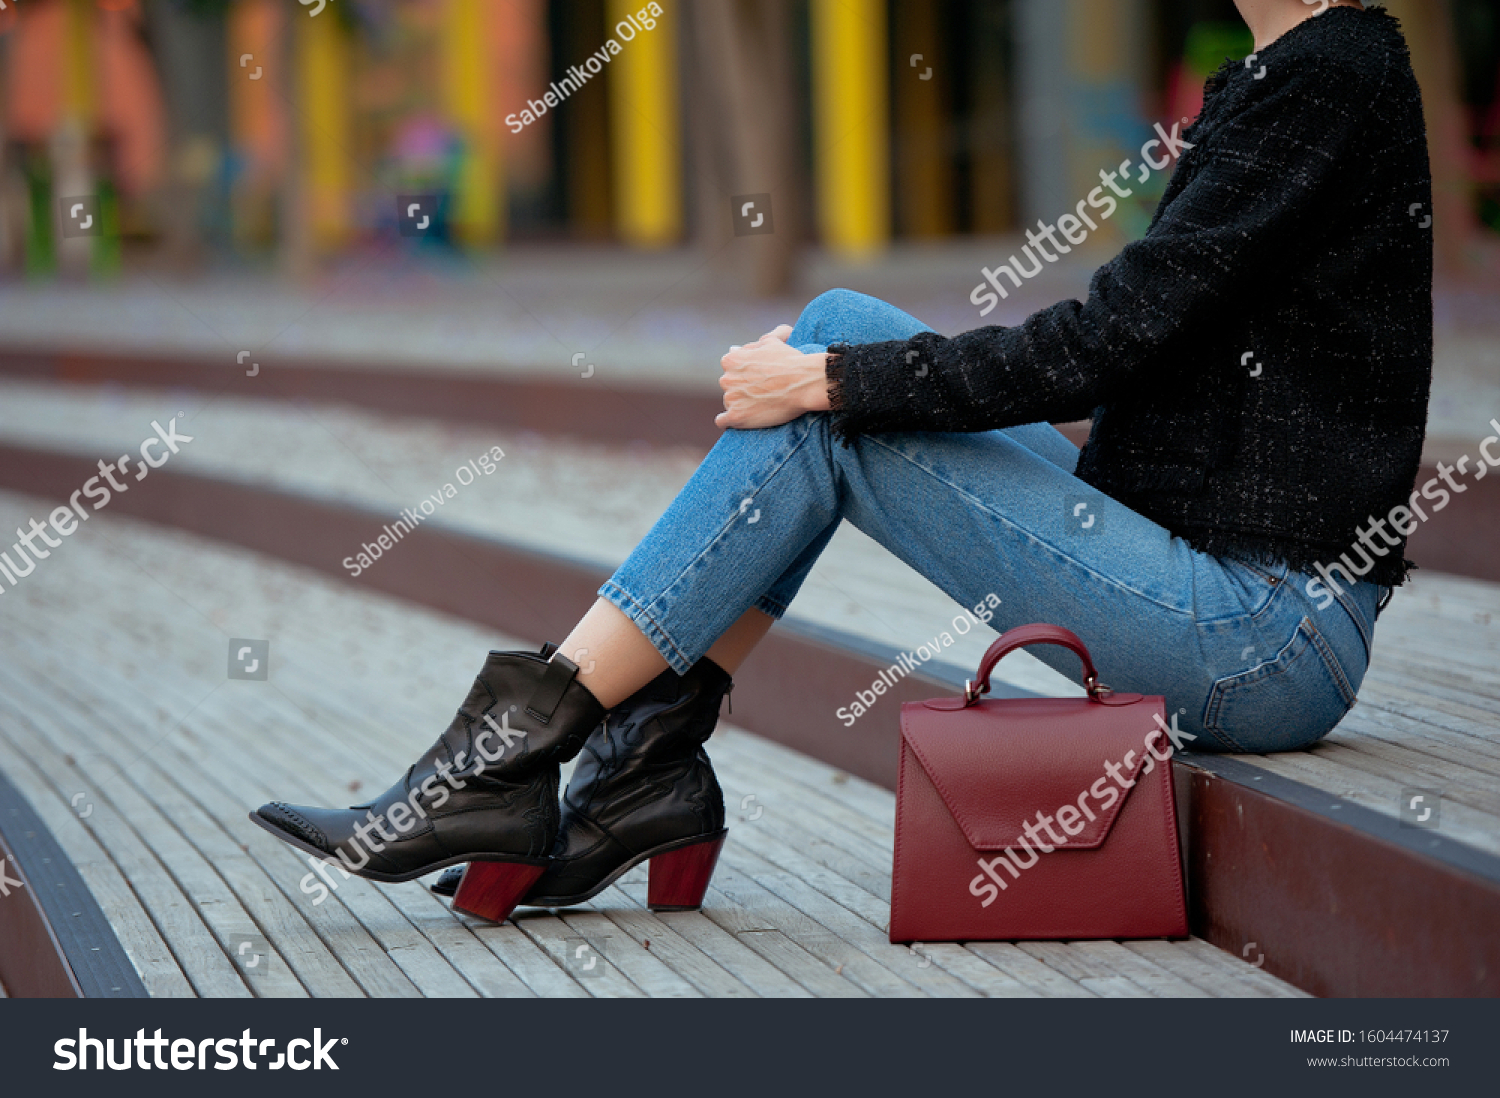 Fashionable young woman in high heel black cowboy boots, blue jeans, black tweed jacket and burgundy handbag on the city street. Street style. #1604474137